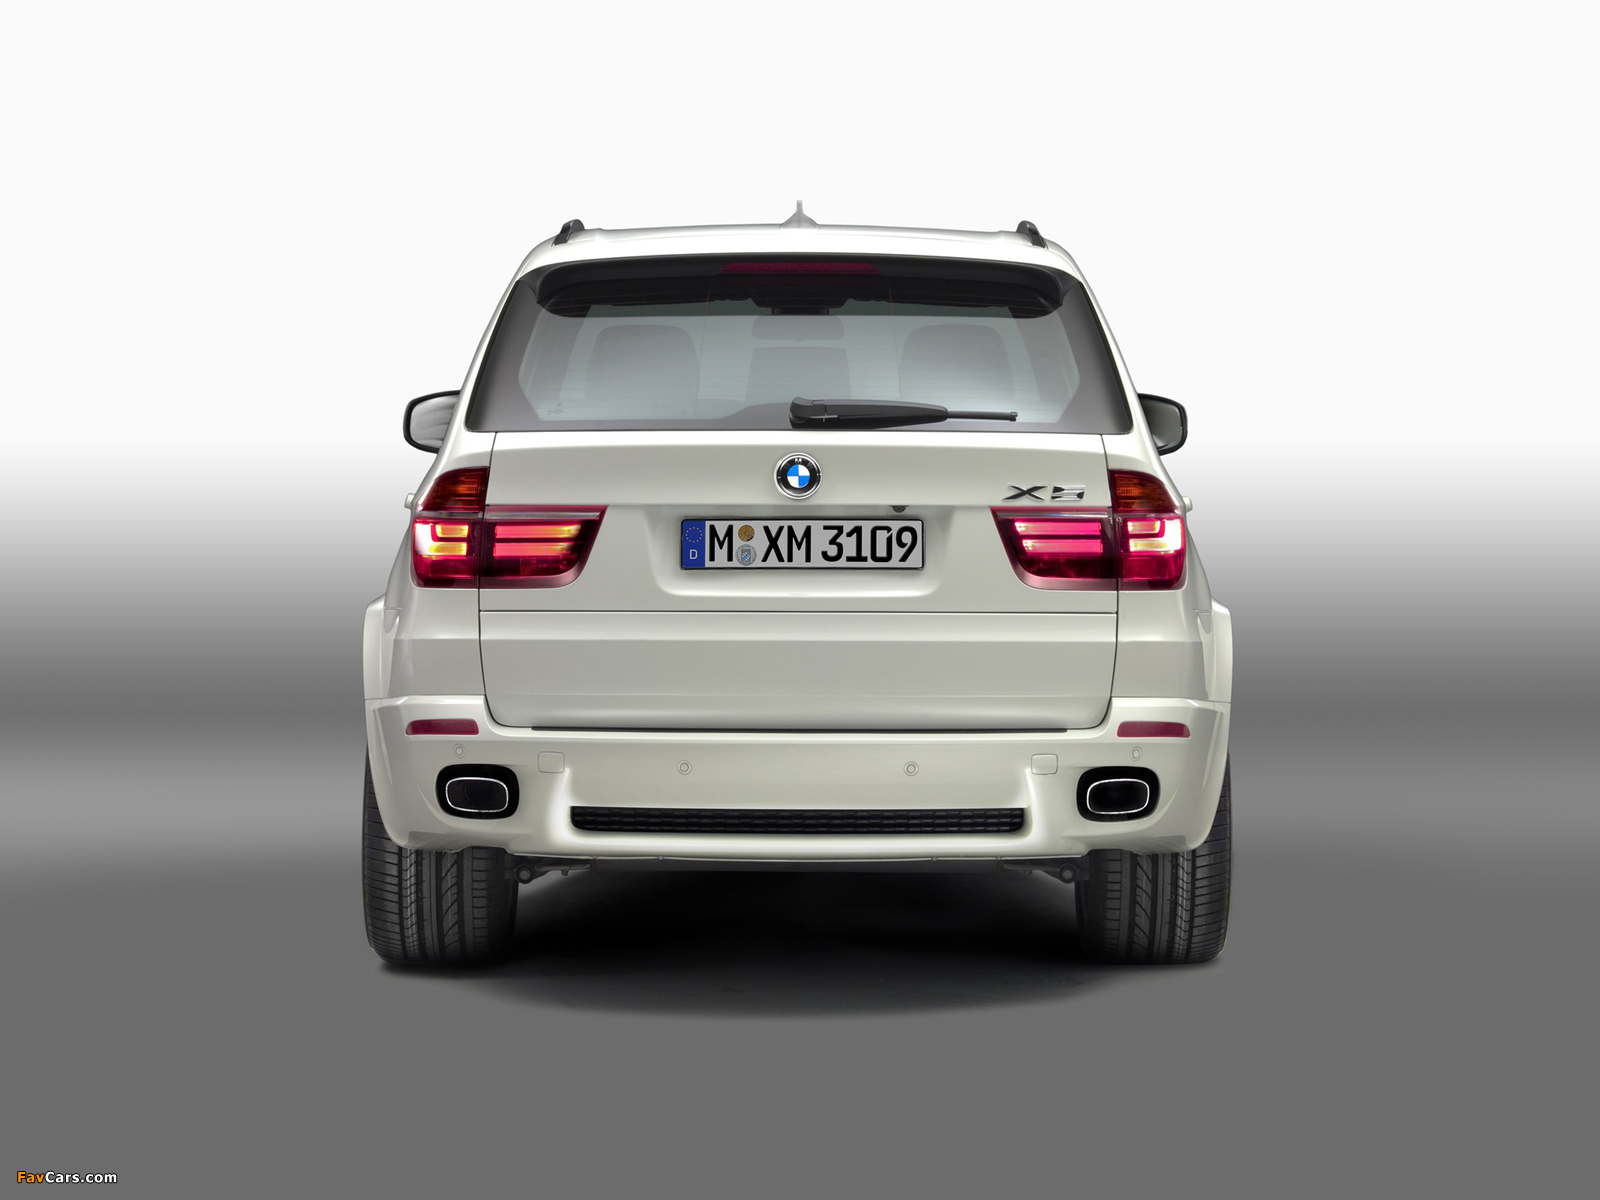 BMW X5 xDrive50i M Sports Package (E70) 2010 images (1600 x 1200)